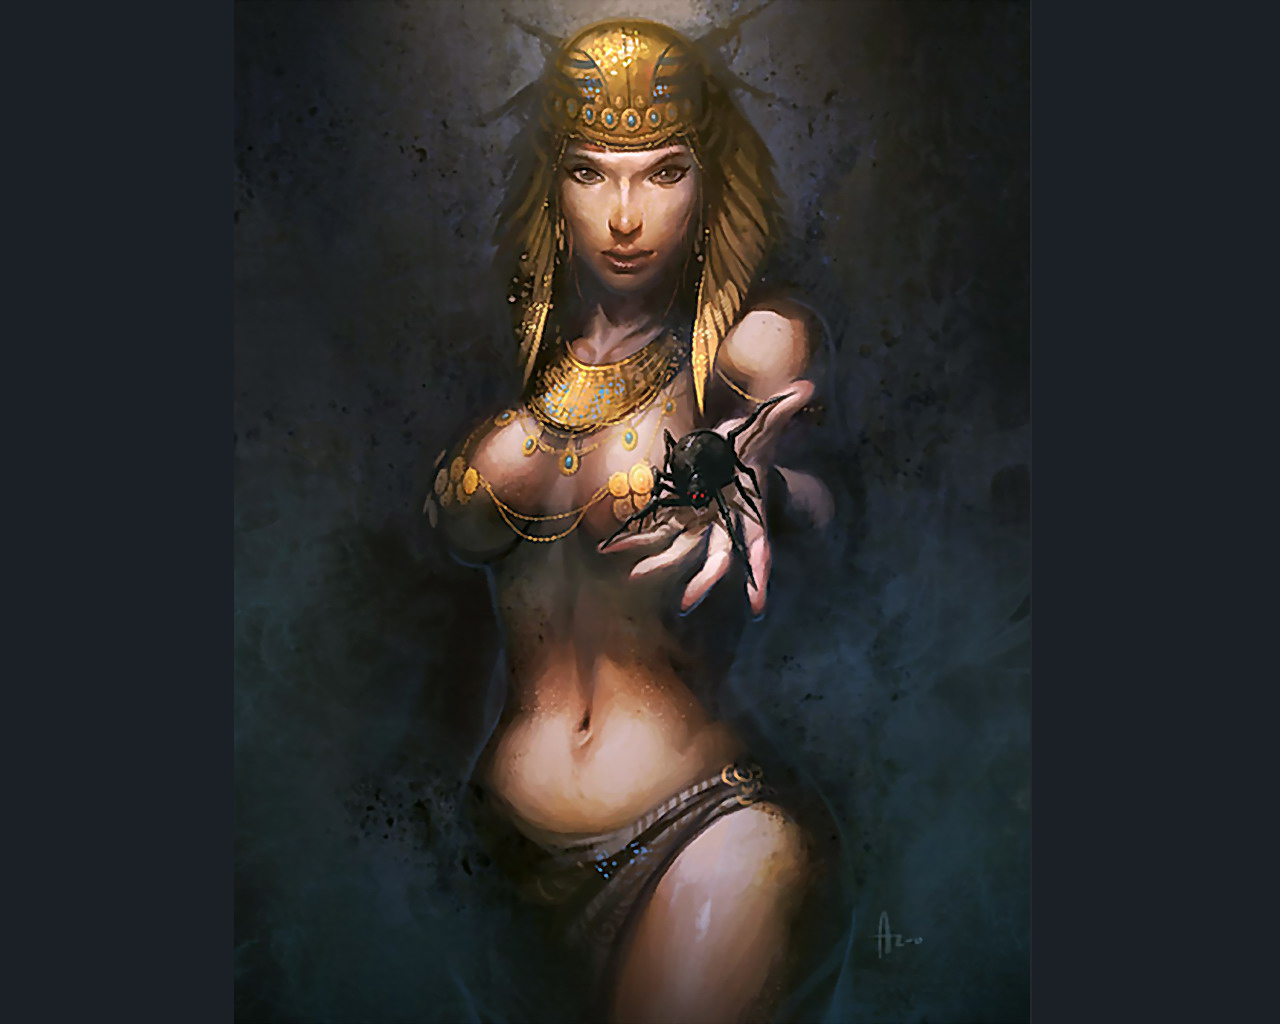 Sexy Fantasy Mythical Girls 3D Wallpapers ~ Harry styles 2013